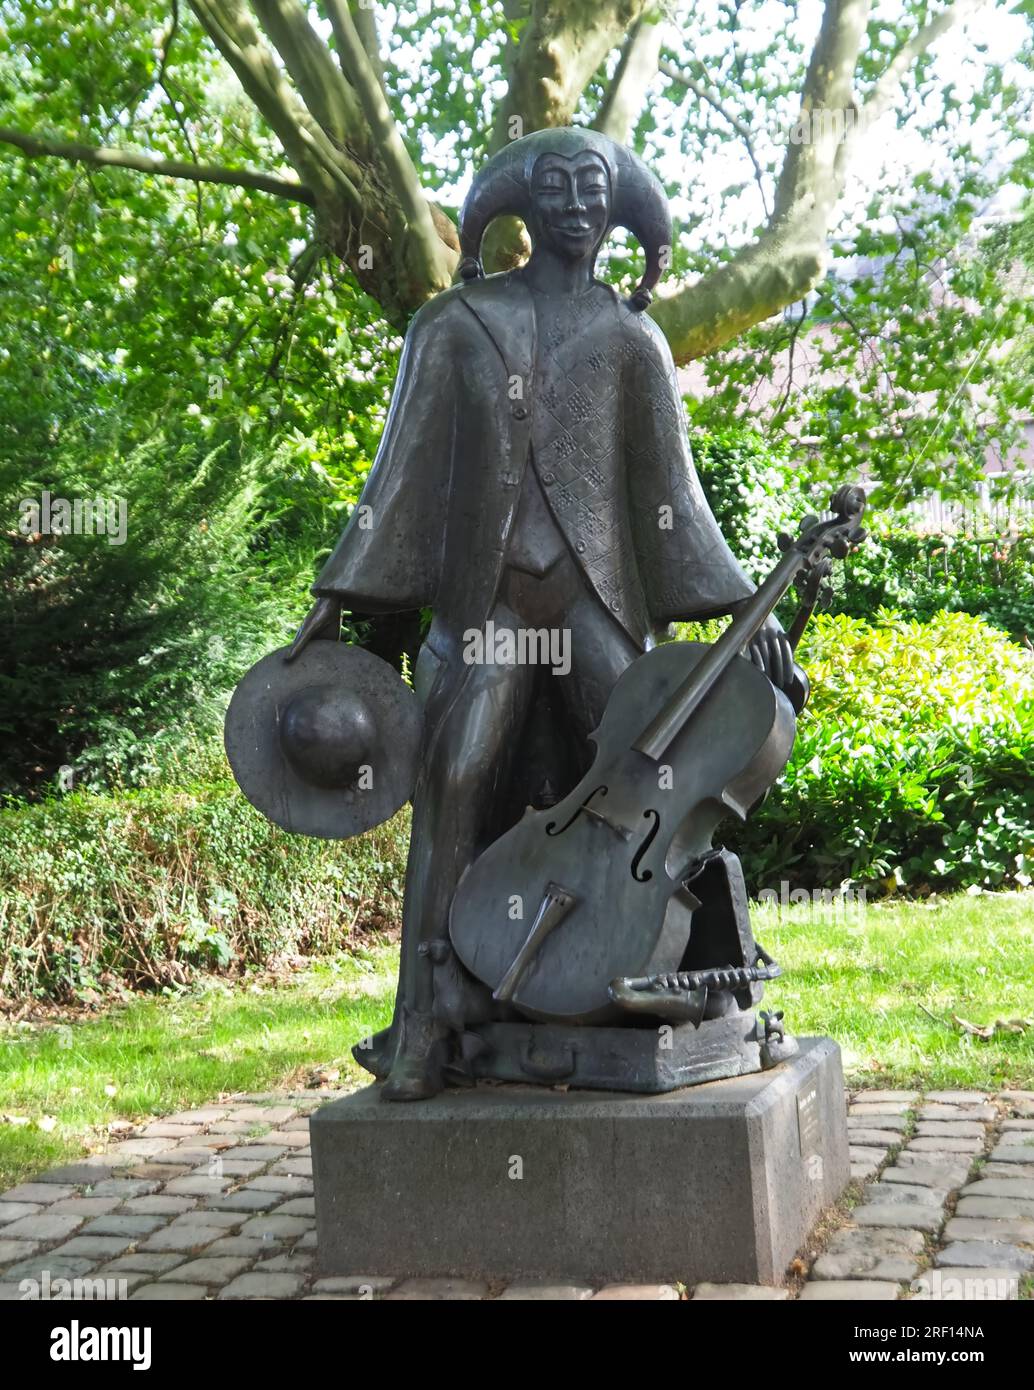 Juggler and muse sculpture in the castle park of Schloss Neersen in Germany by Michael Franke Stock Photo